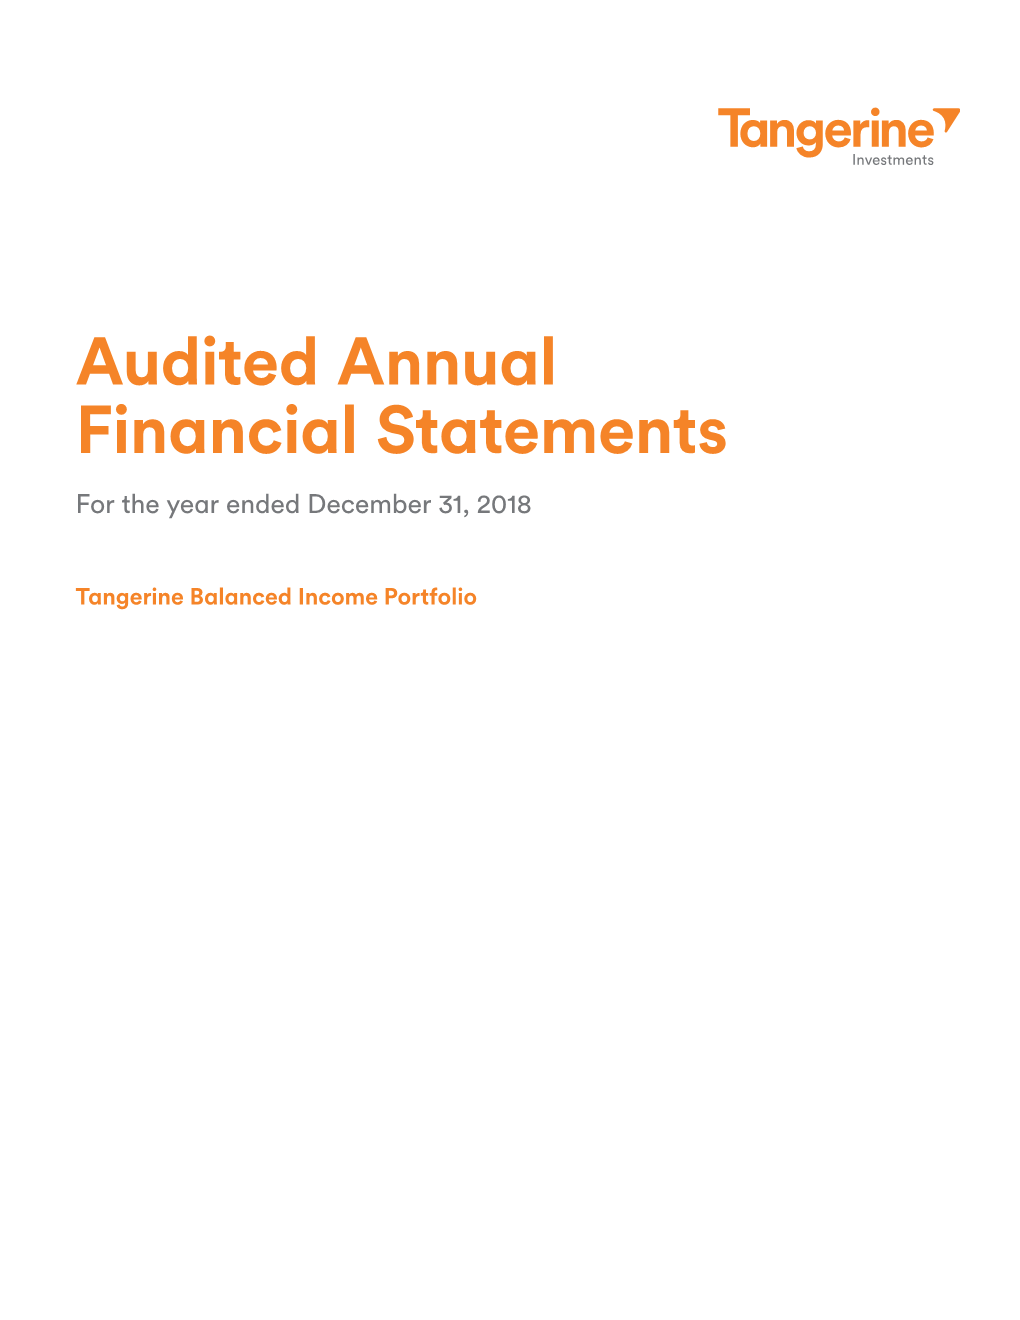 Audited Annual Financial Statements for the Year Ended December 31, 2018